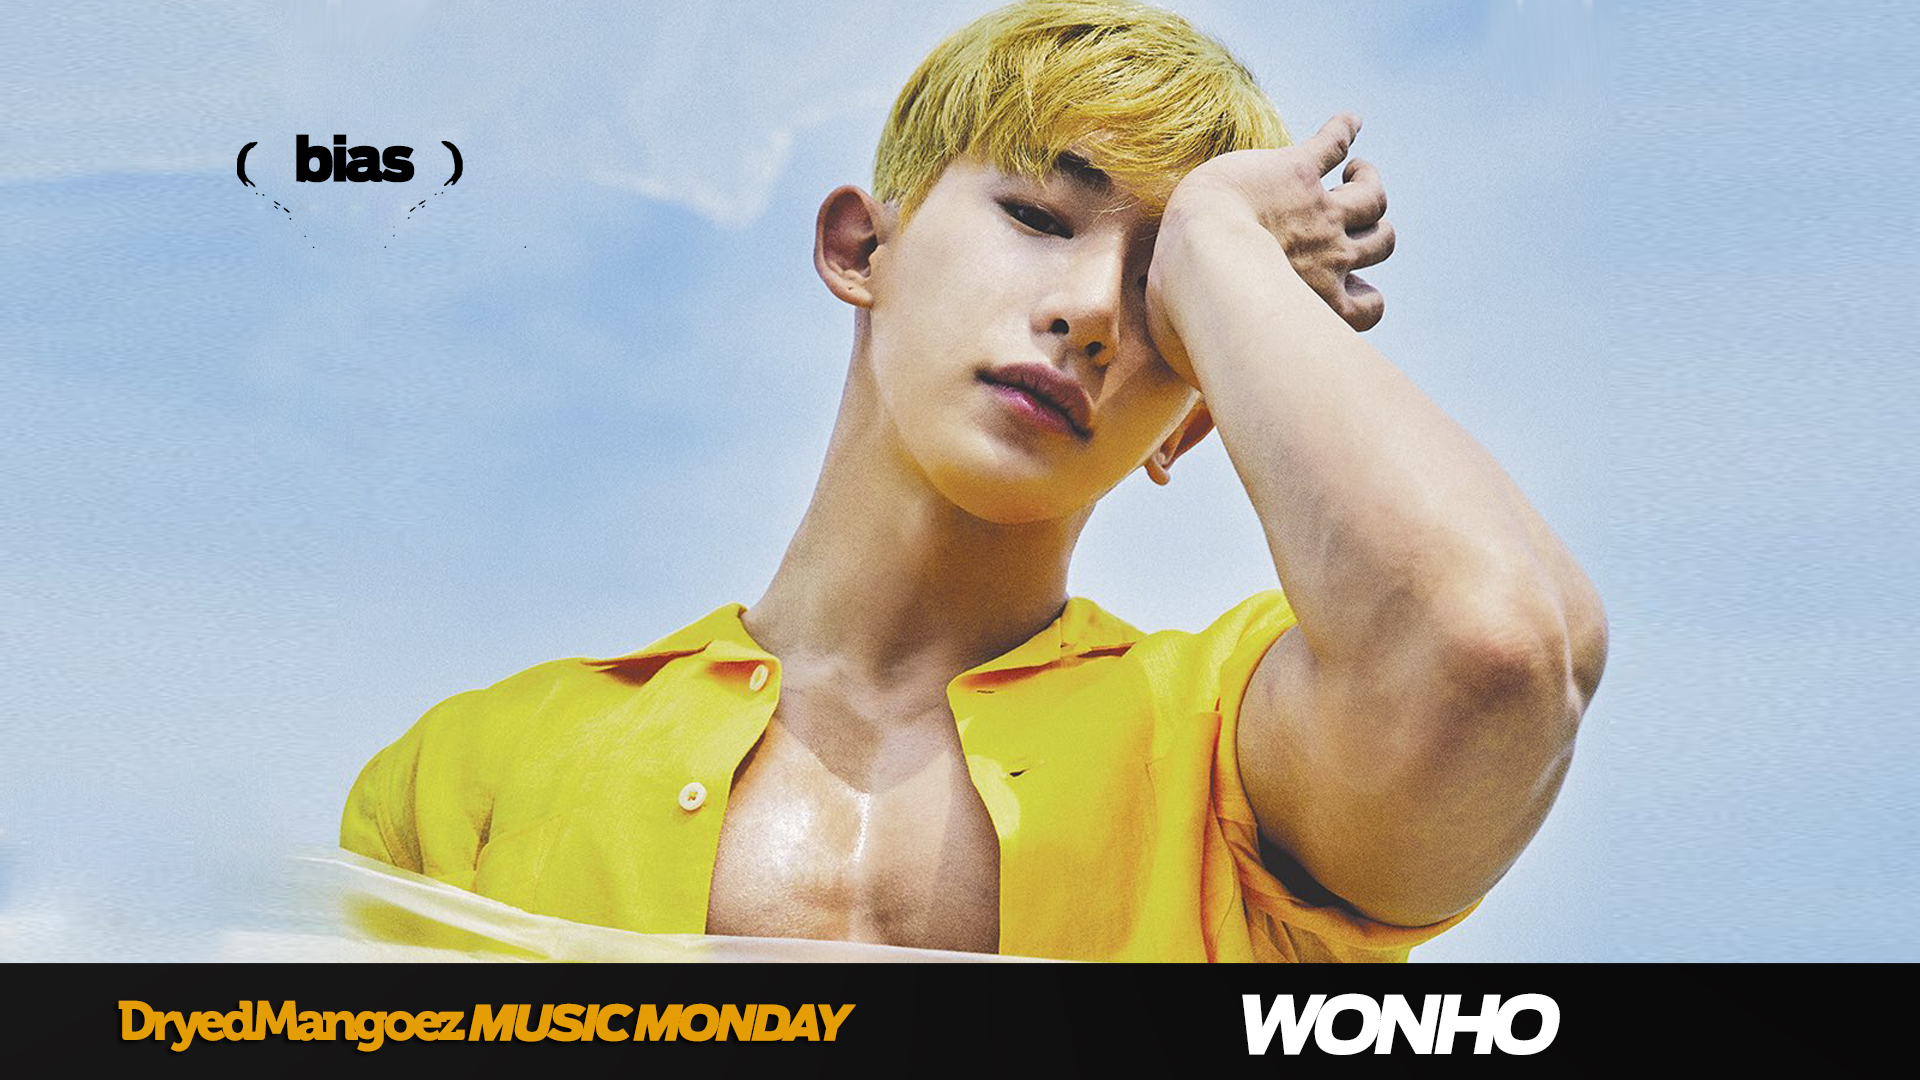 Music Monday, September 7, 2020 – From “No.Mercy” to “Open Mind” – Wonho’s Strong Solo Debut